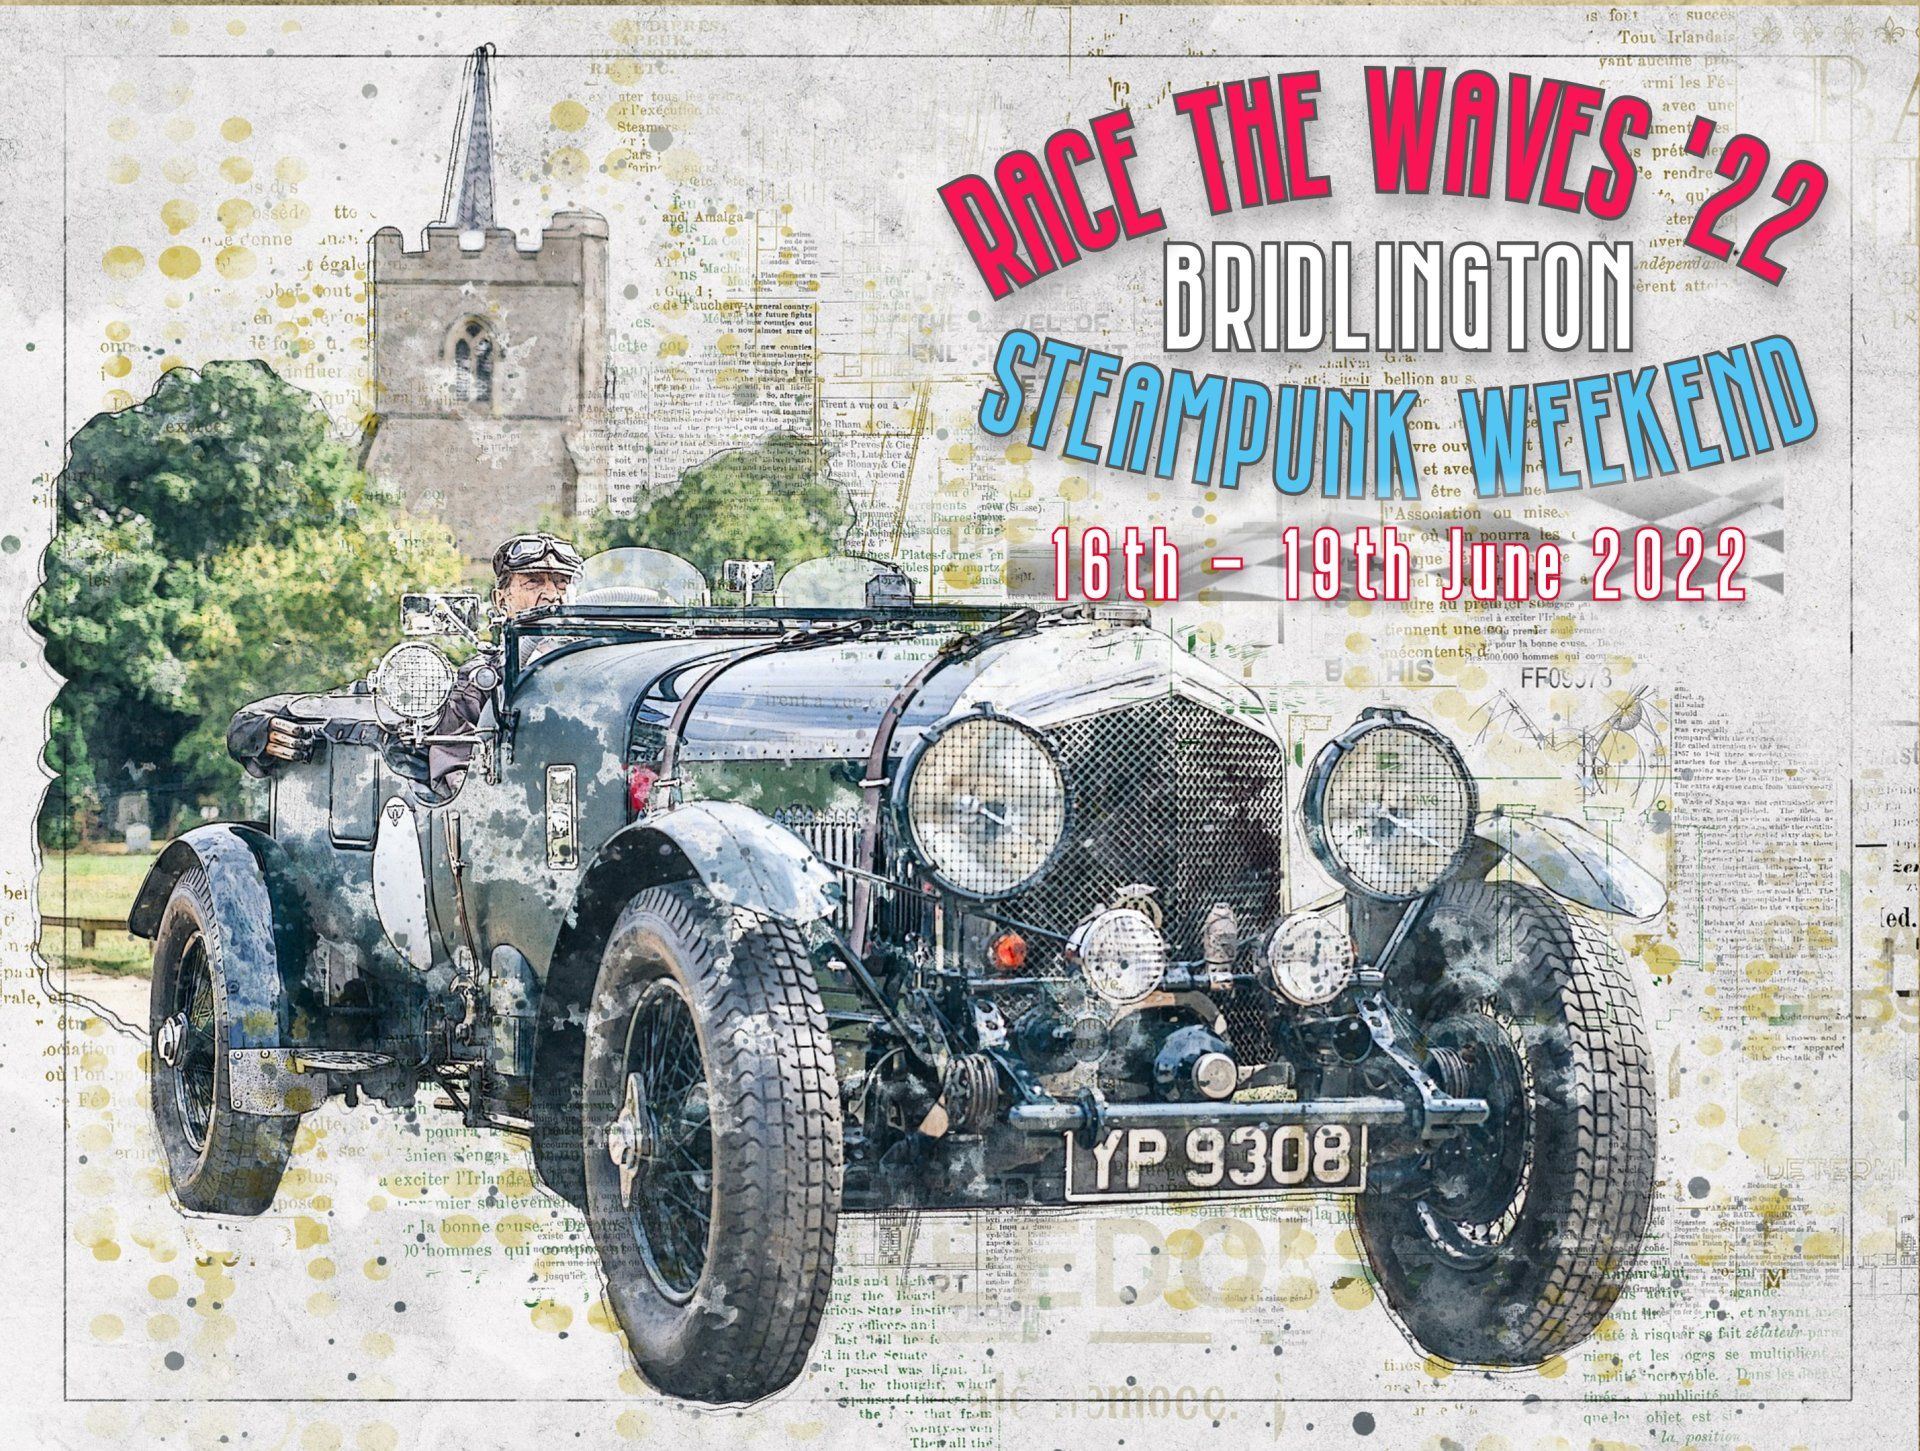 Race the waves steampunk festival Juse in Yorkshire